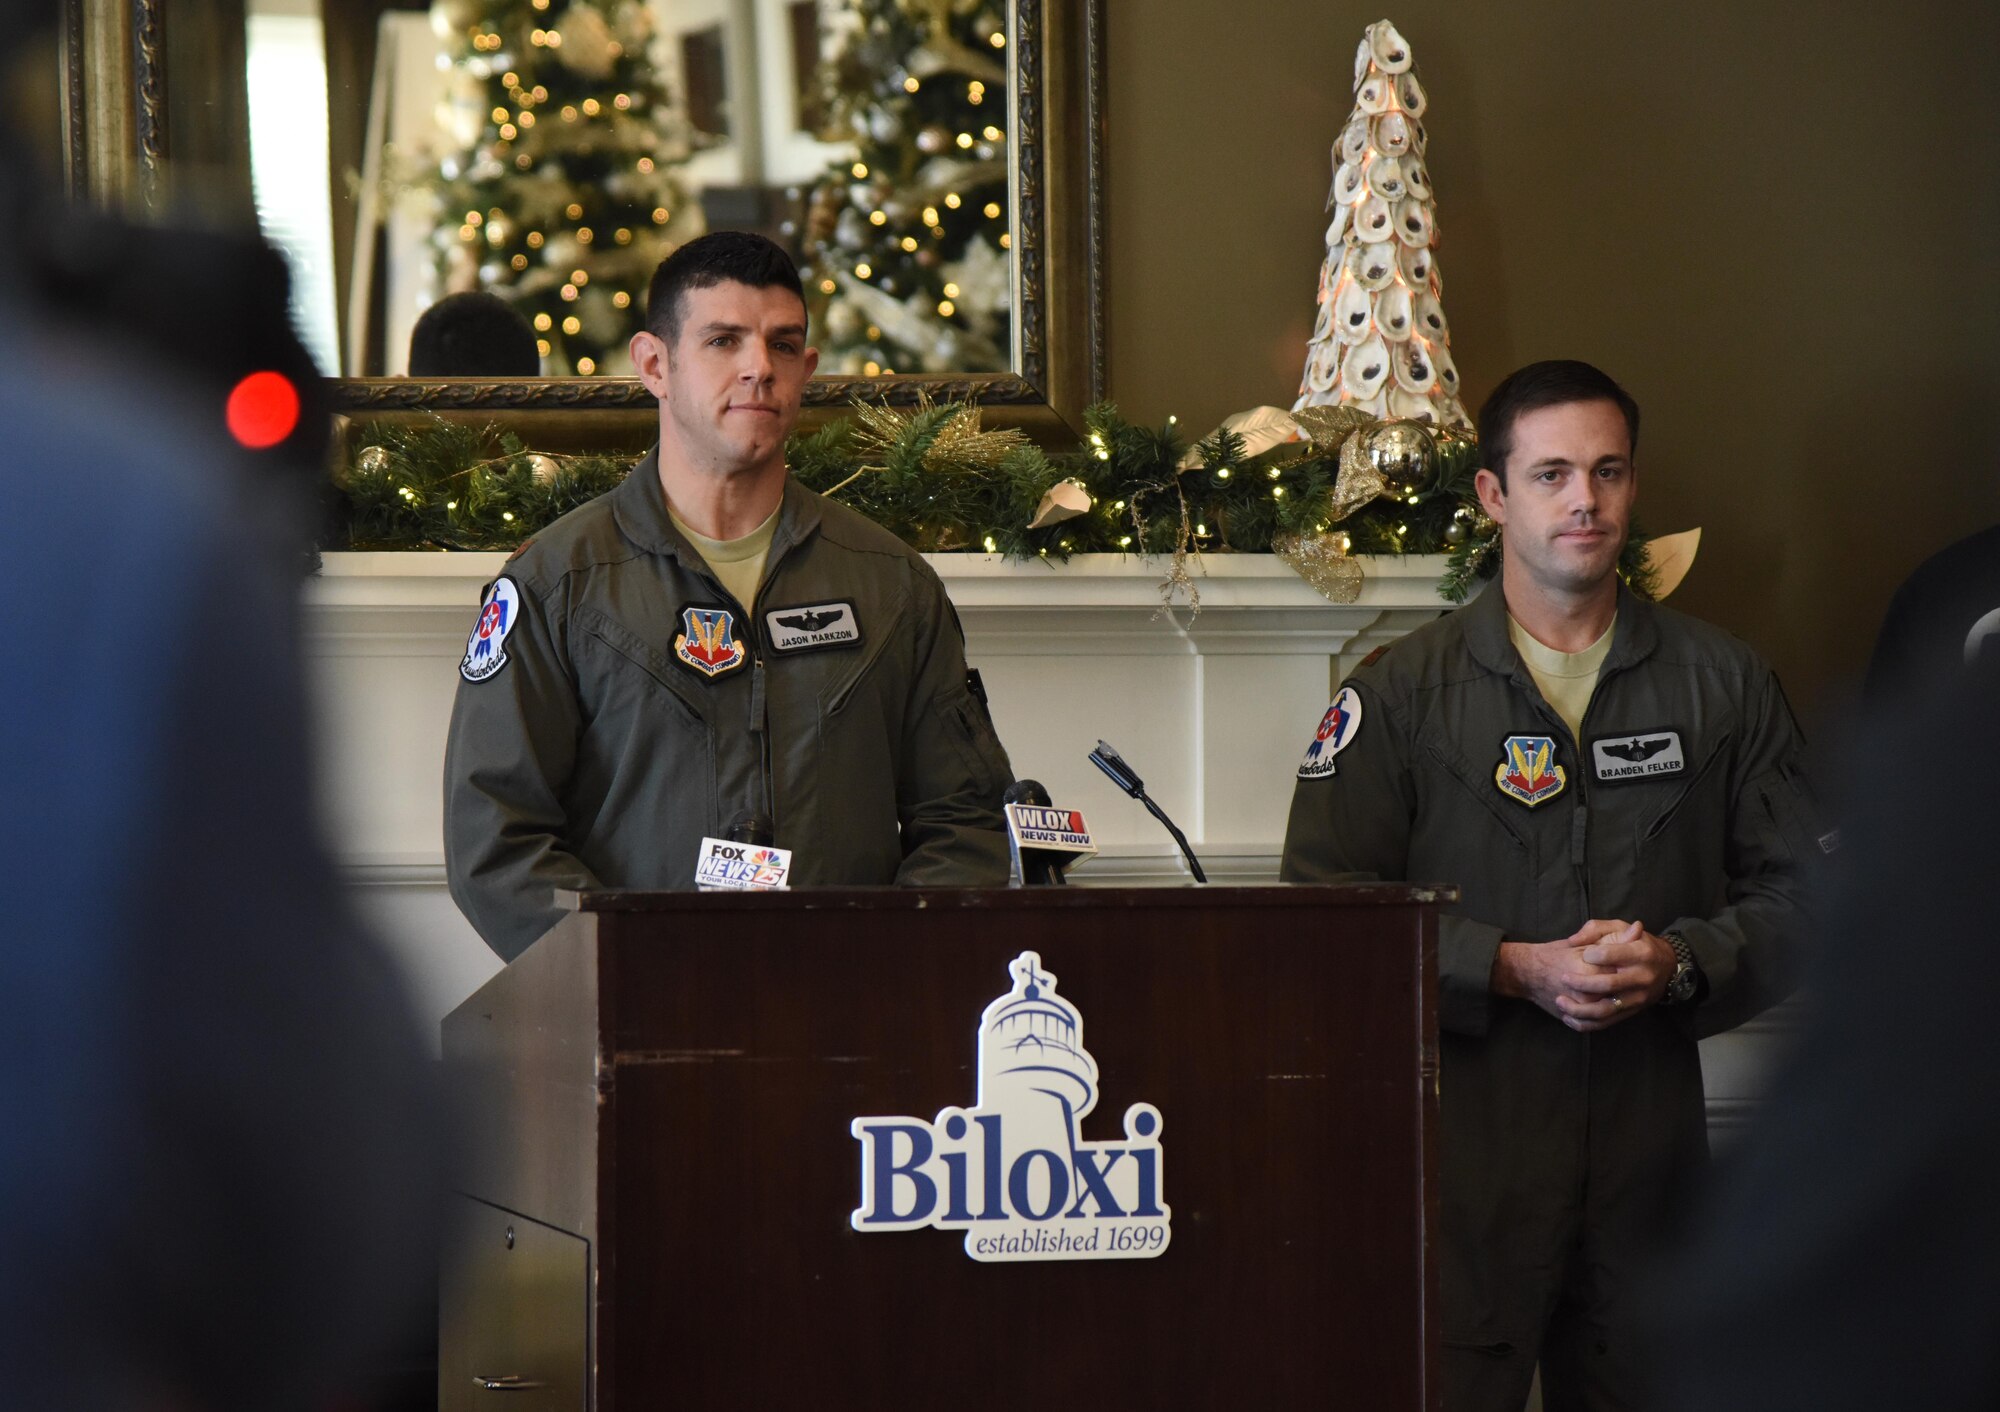 U.S. Air Force Maj. Jason "Flack" Markzon, inbound Thunderbird pilot #8, delivers remarks during a press conference formally announcing Thunder Over the Sound: The Keesler and Biloxi Air and Space Show at the Biloxi Visitors Center, in Biloxi, Mississippi, Dec. 18, 2018. Markzon was joined by Keesler and Biloxi leadership at the press conference which reviewed and confirmed information and acts for the air show and allowed attendees to meet with and ask questions of all speakers. (U.S. Air Force photo by Kemberly Groue)